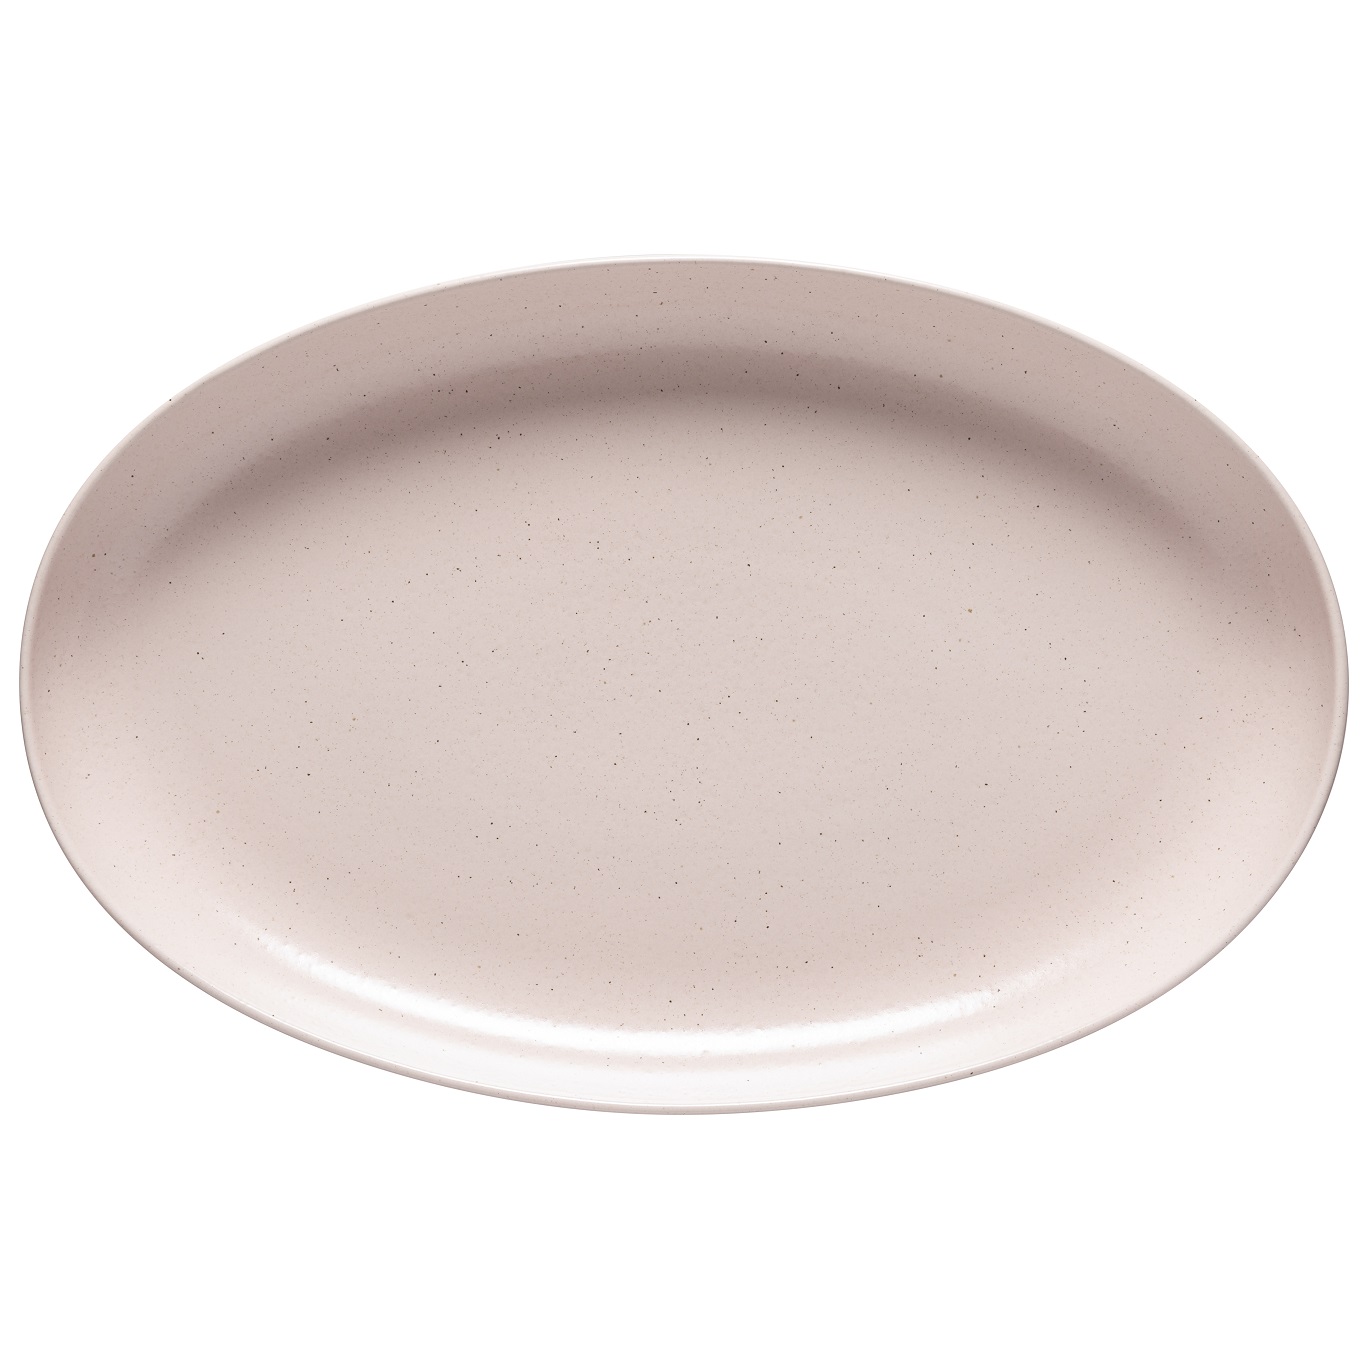 Pacifica Marshmallow Oval Platter 40.8cm Gift